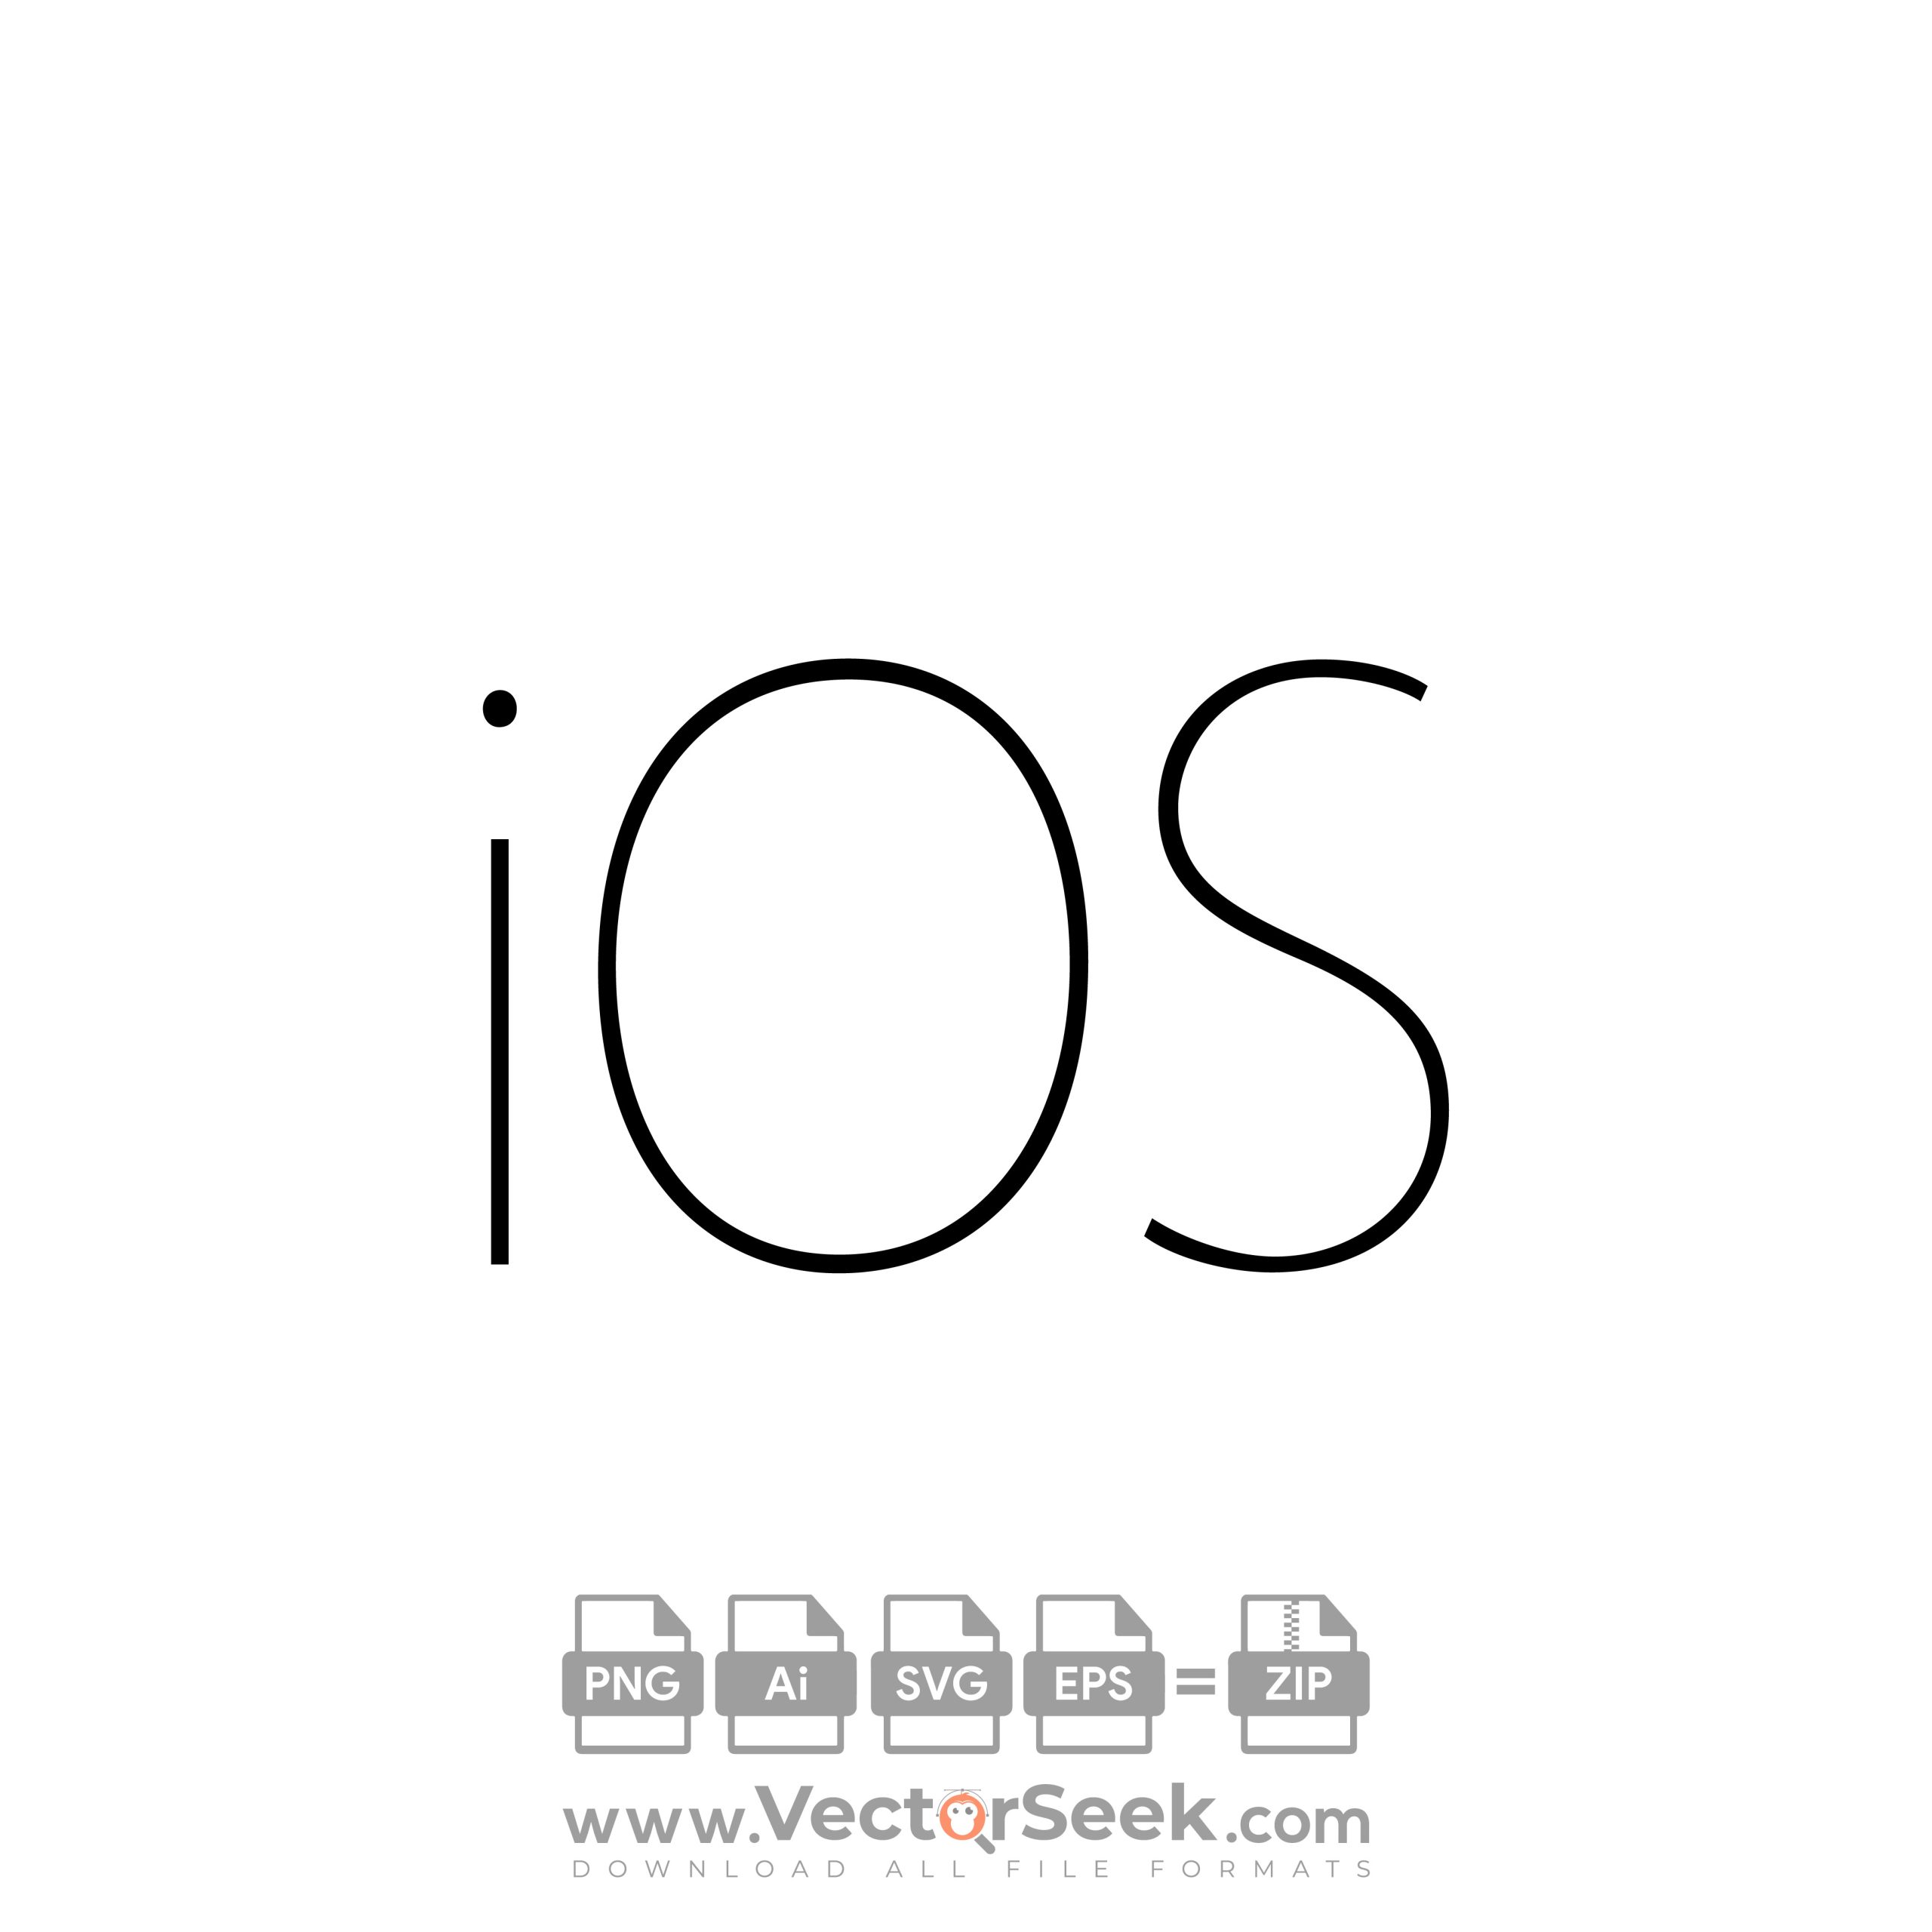 Apple iOS Logo Vector - (.Ai .PNG .SVG .EPS Free Download)